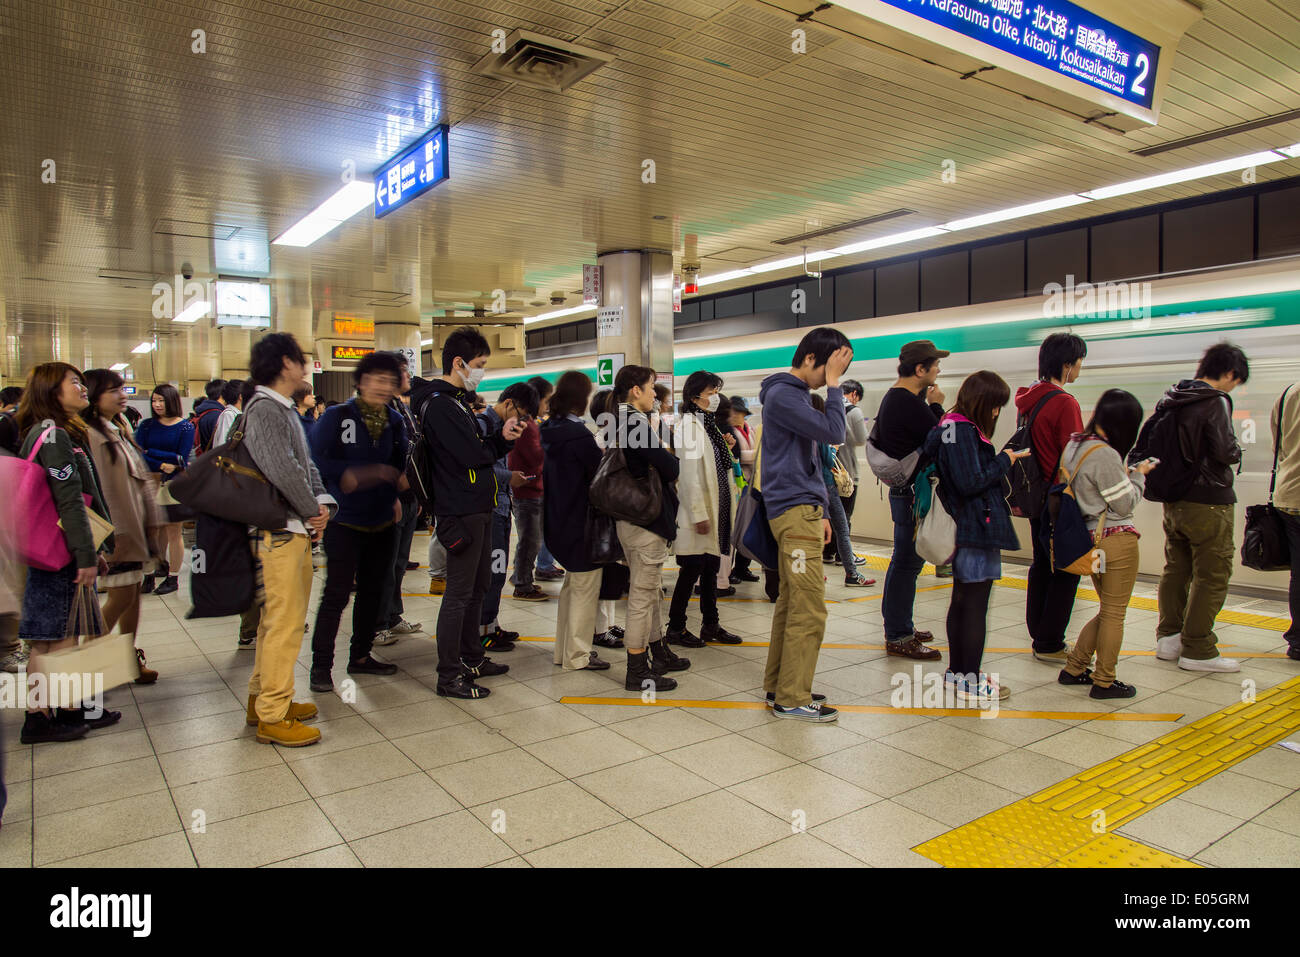 People on line waiting for the subway train, Kyoto, Japan Stock Photo